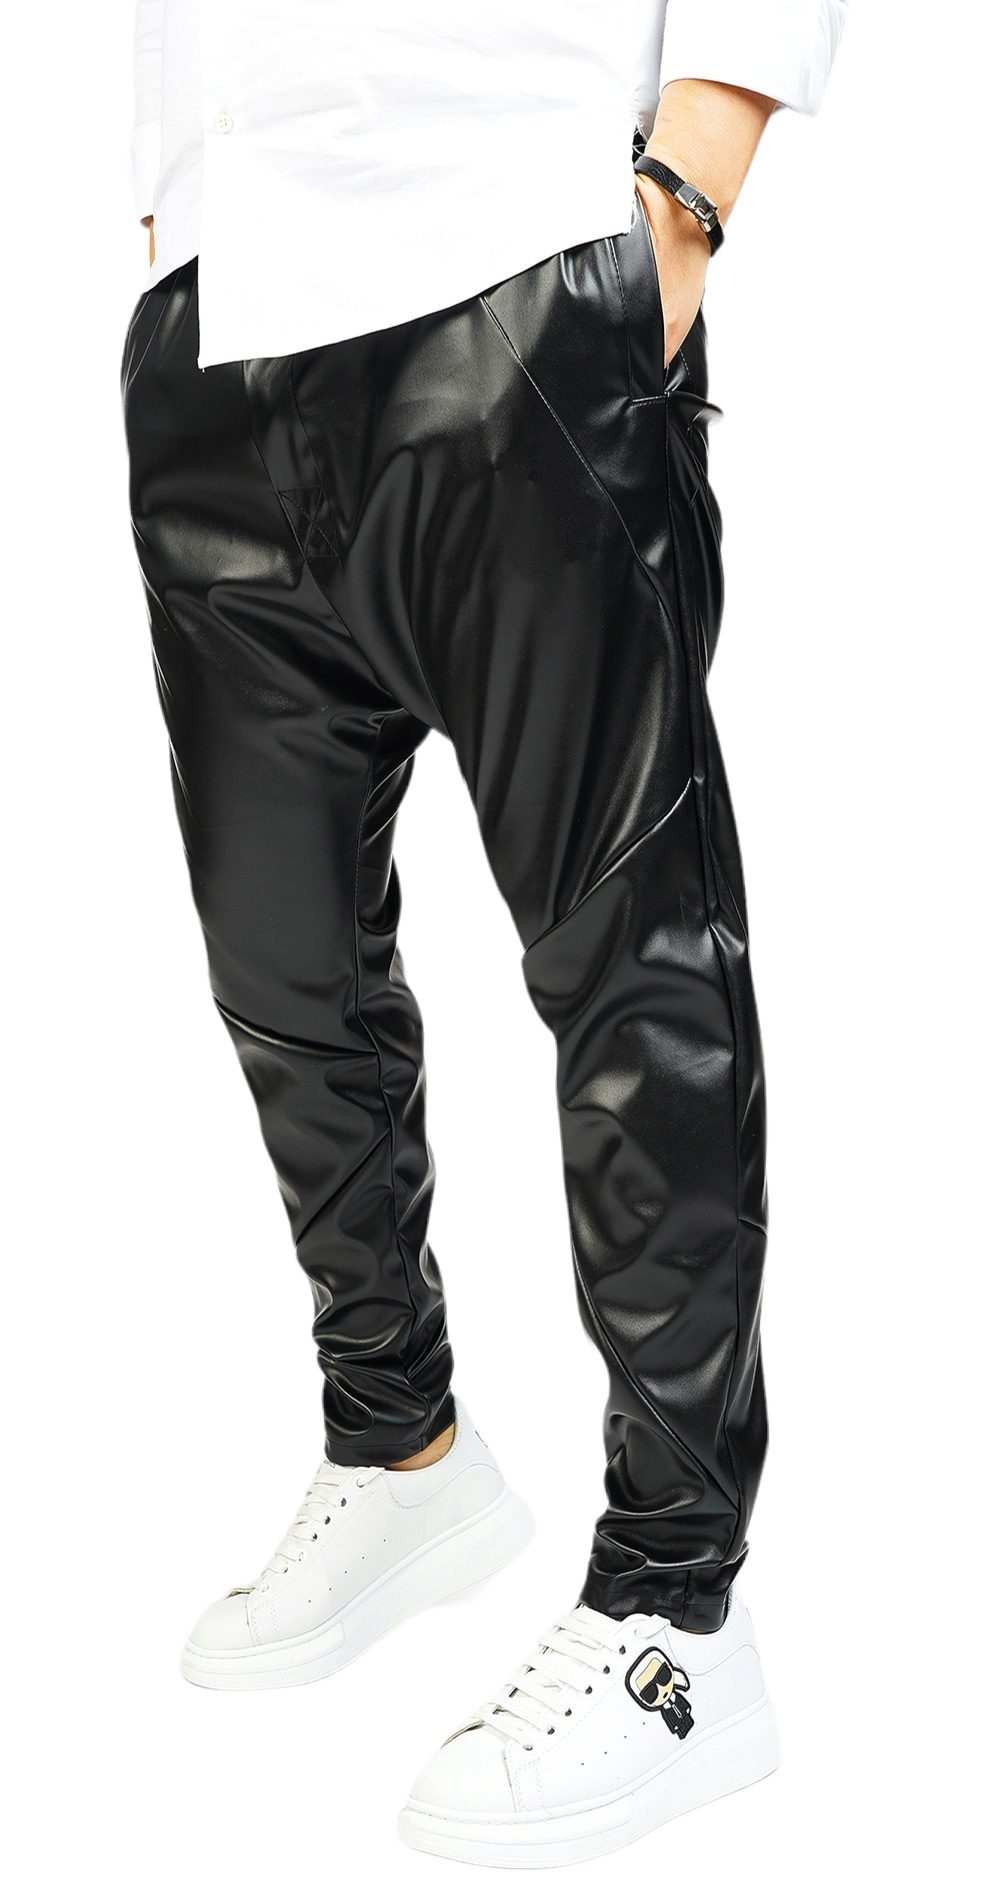 Exclusive Black Leather Pants - Not For Everyone MPL6009